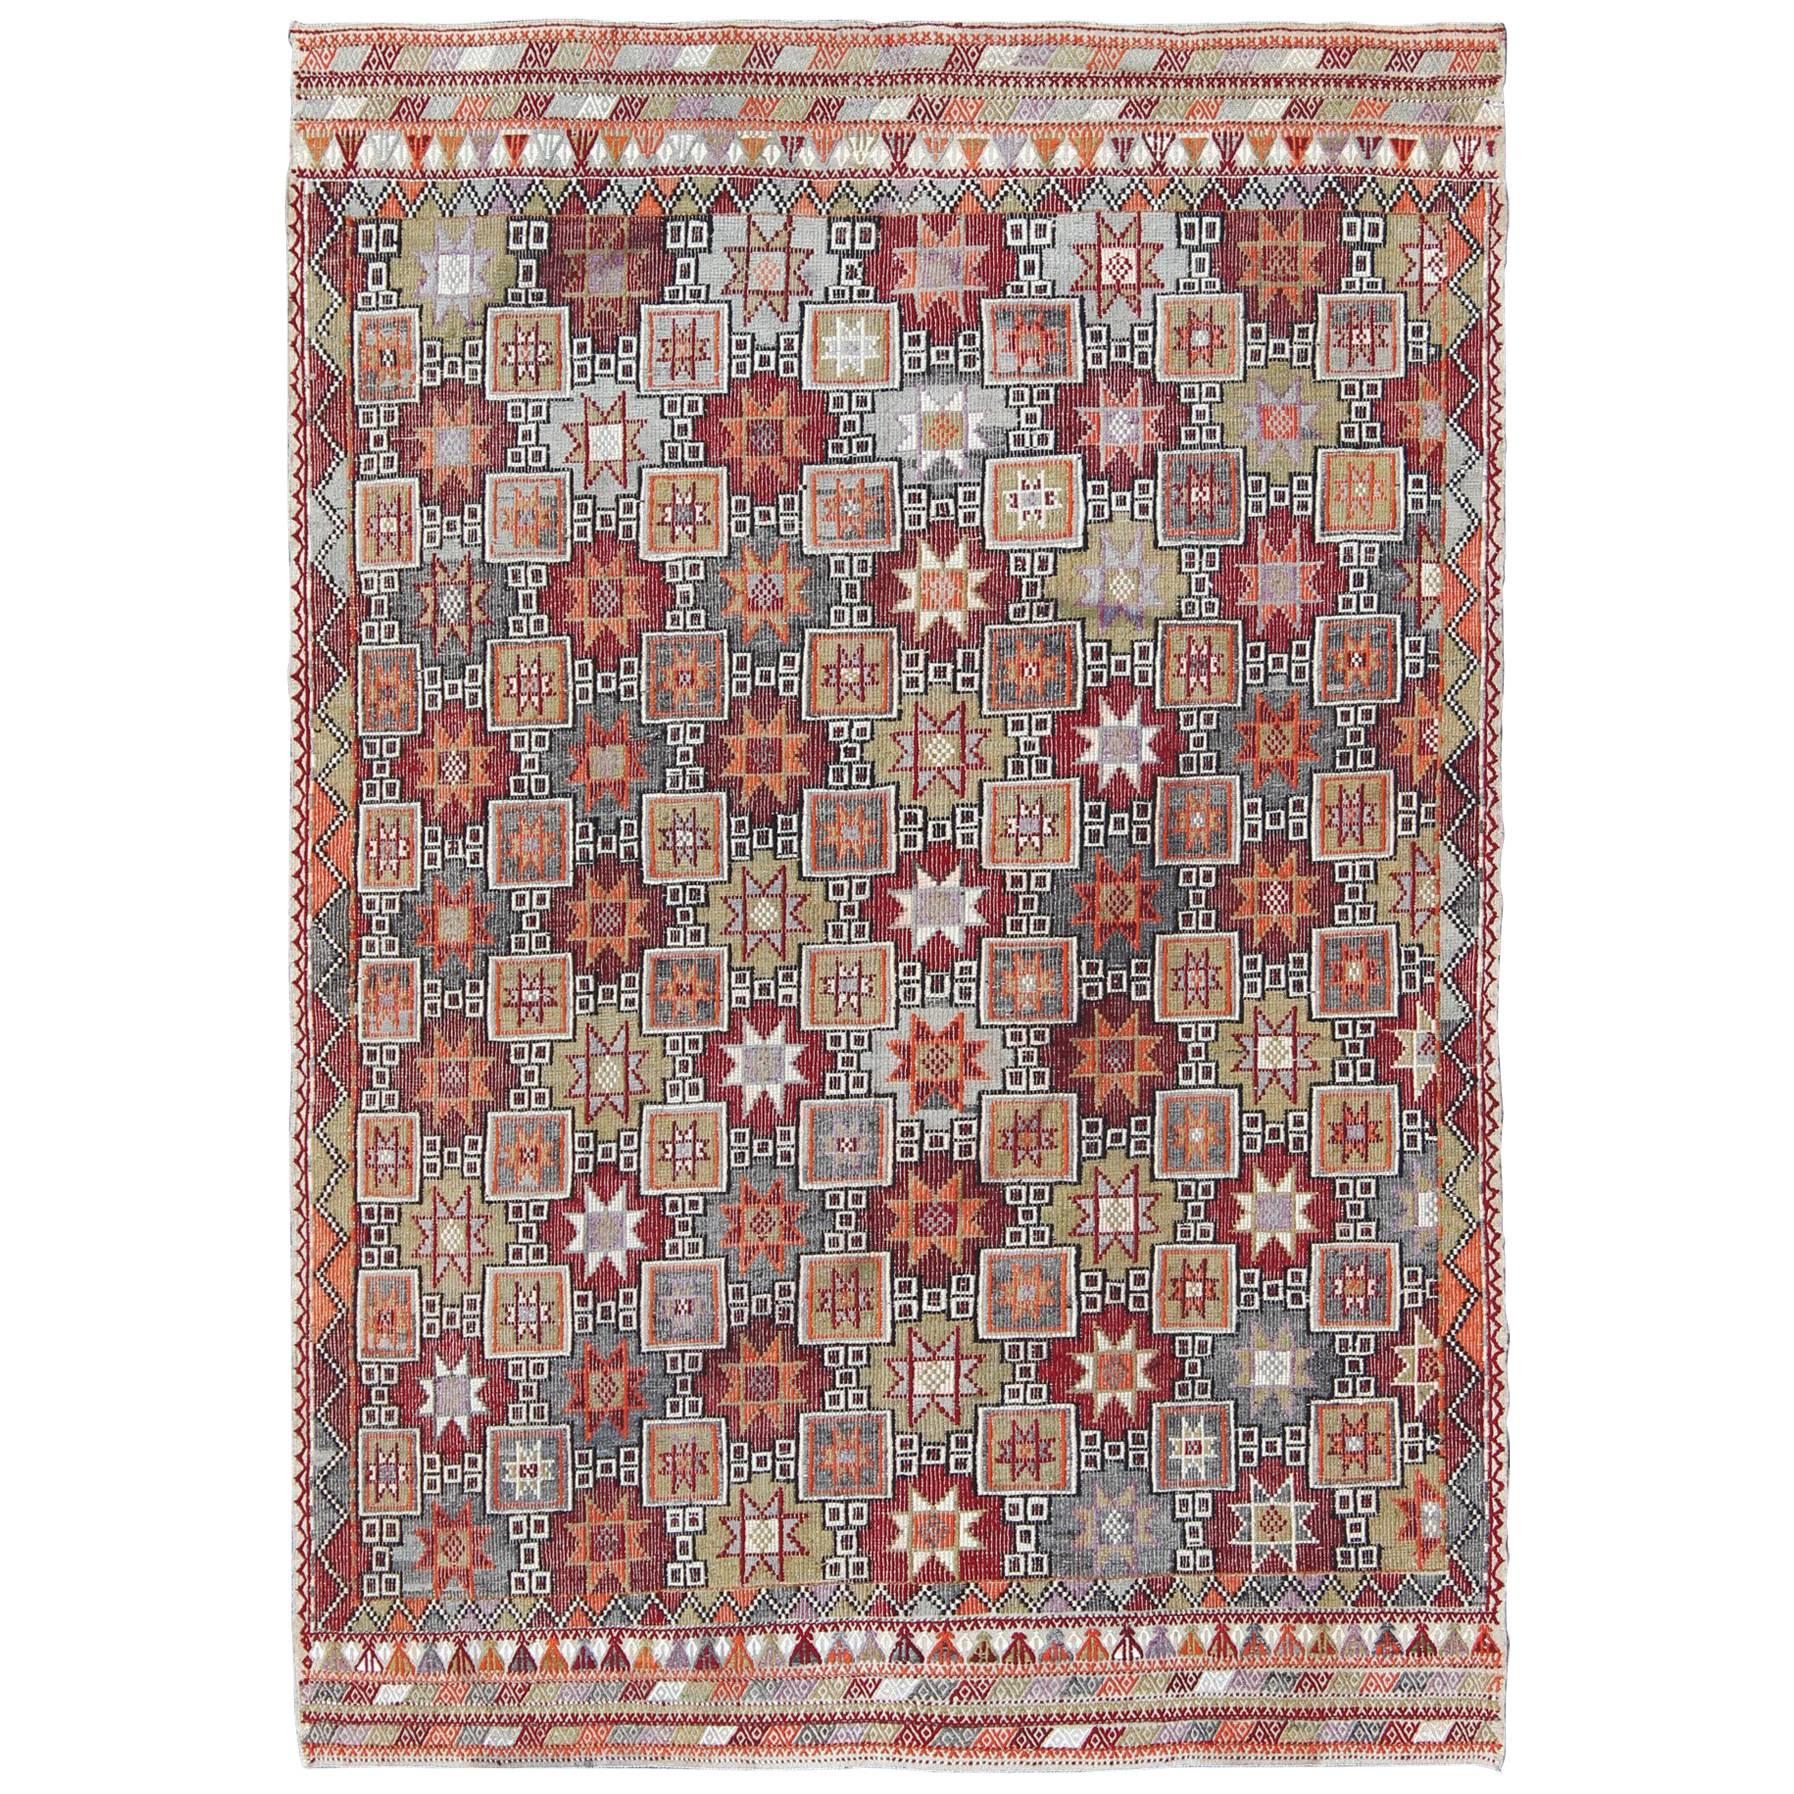 Turkish Vintage Embroidered Kilim Rug With Tribal Star Shapes in Colorful tones